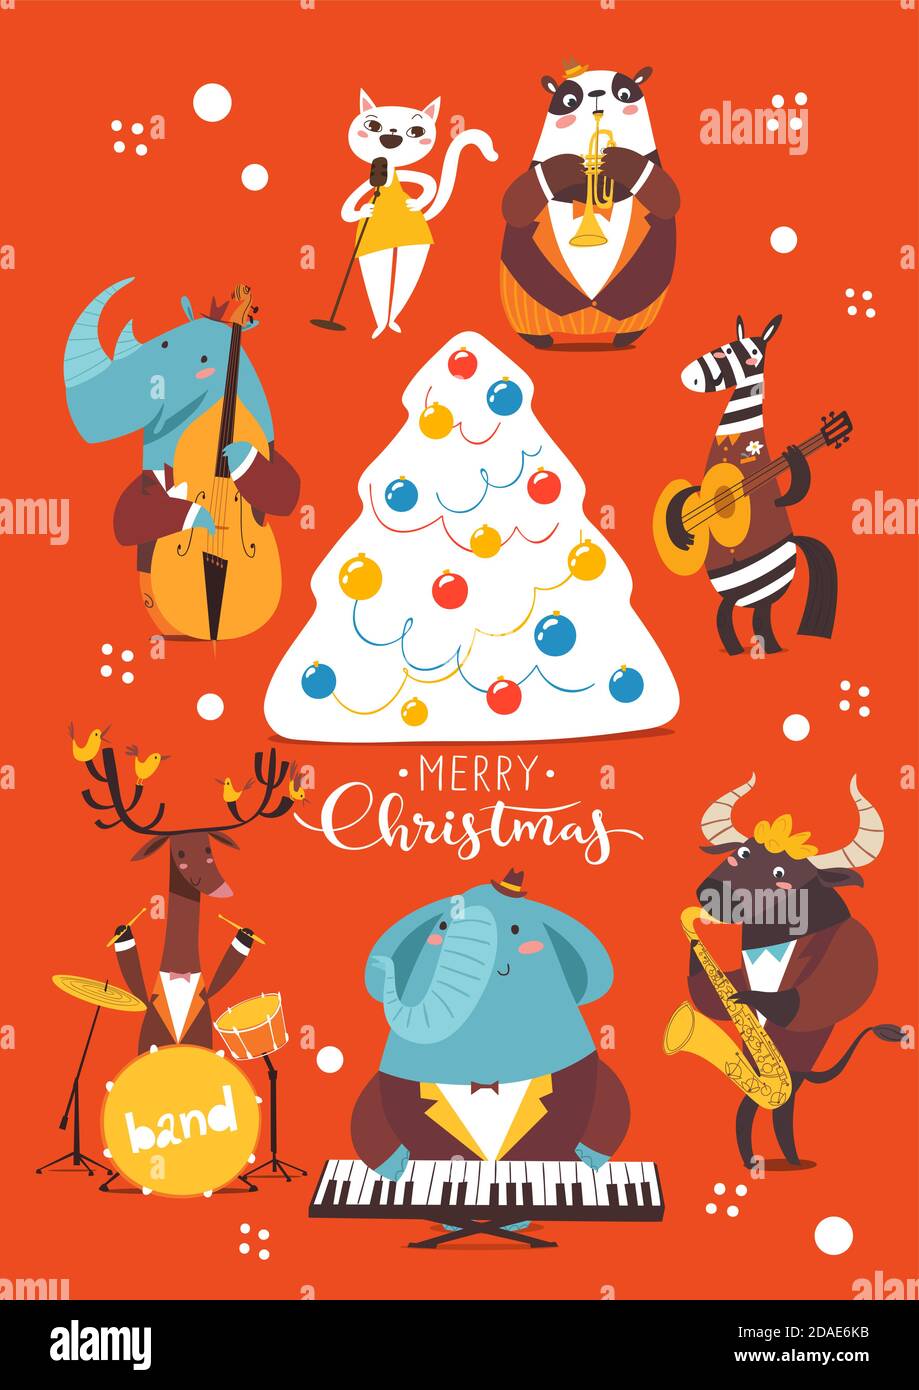 Christmas cartoon poster with cute jazz musicians characters. Stock Vector